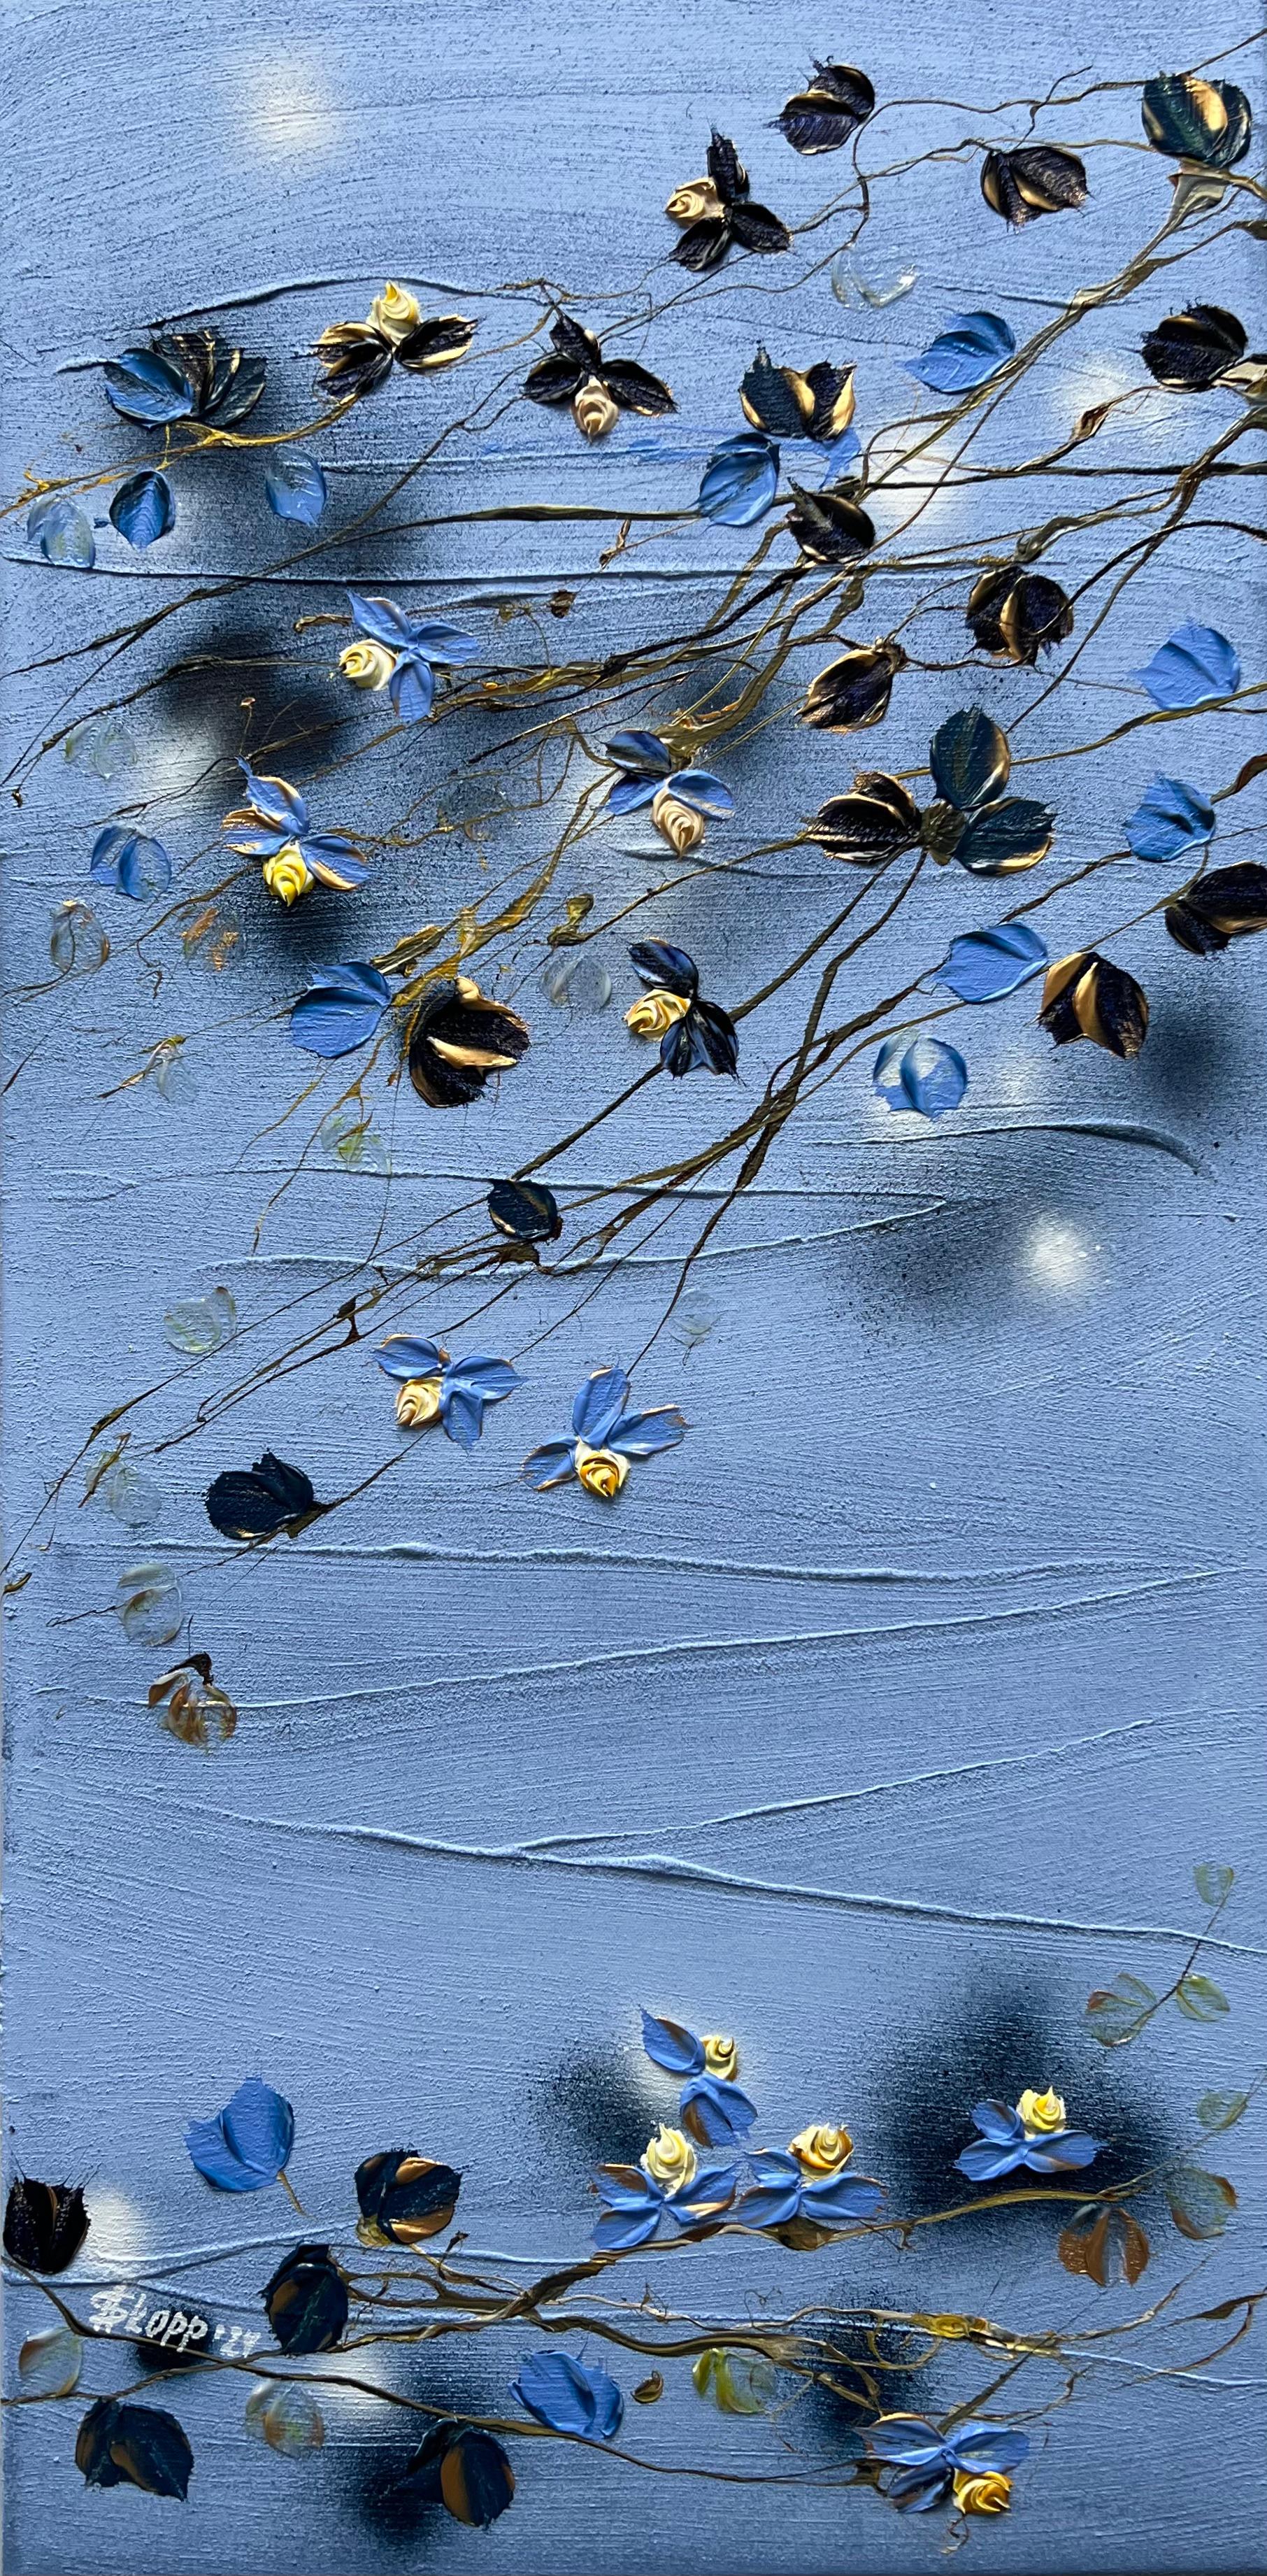 Anastassia Skopp Abstract Painting - "Puder Blue Morning" textured vertical format floral acrylic painting on canvas